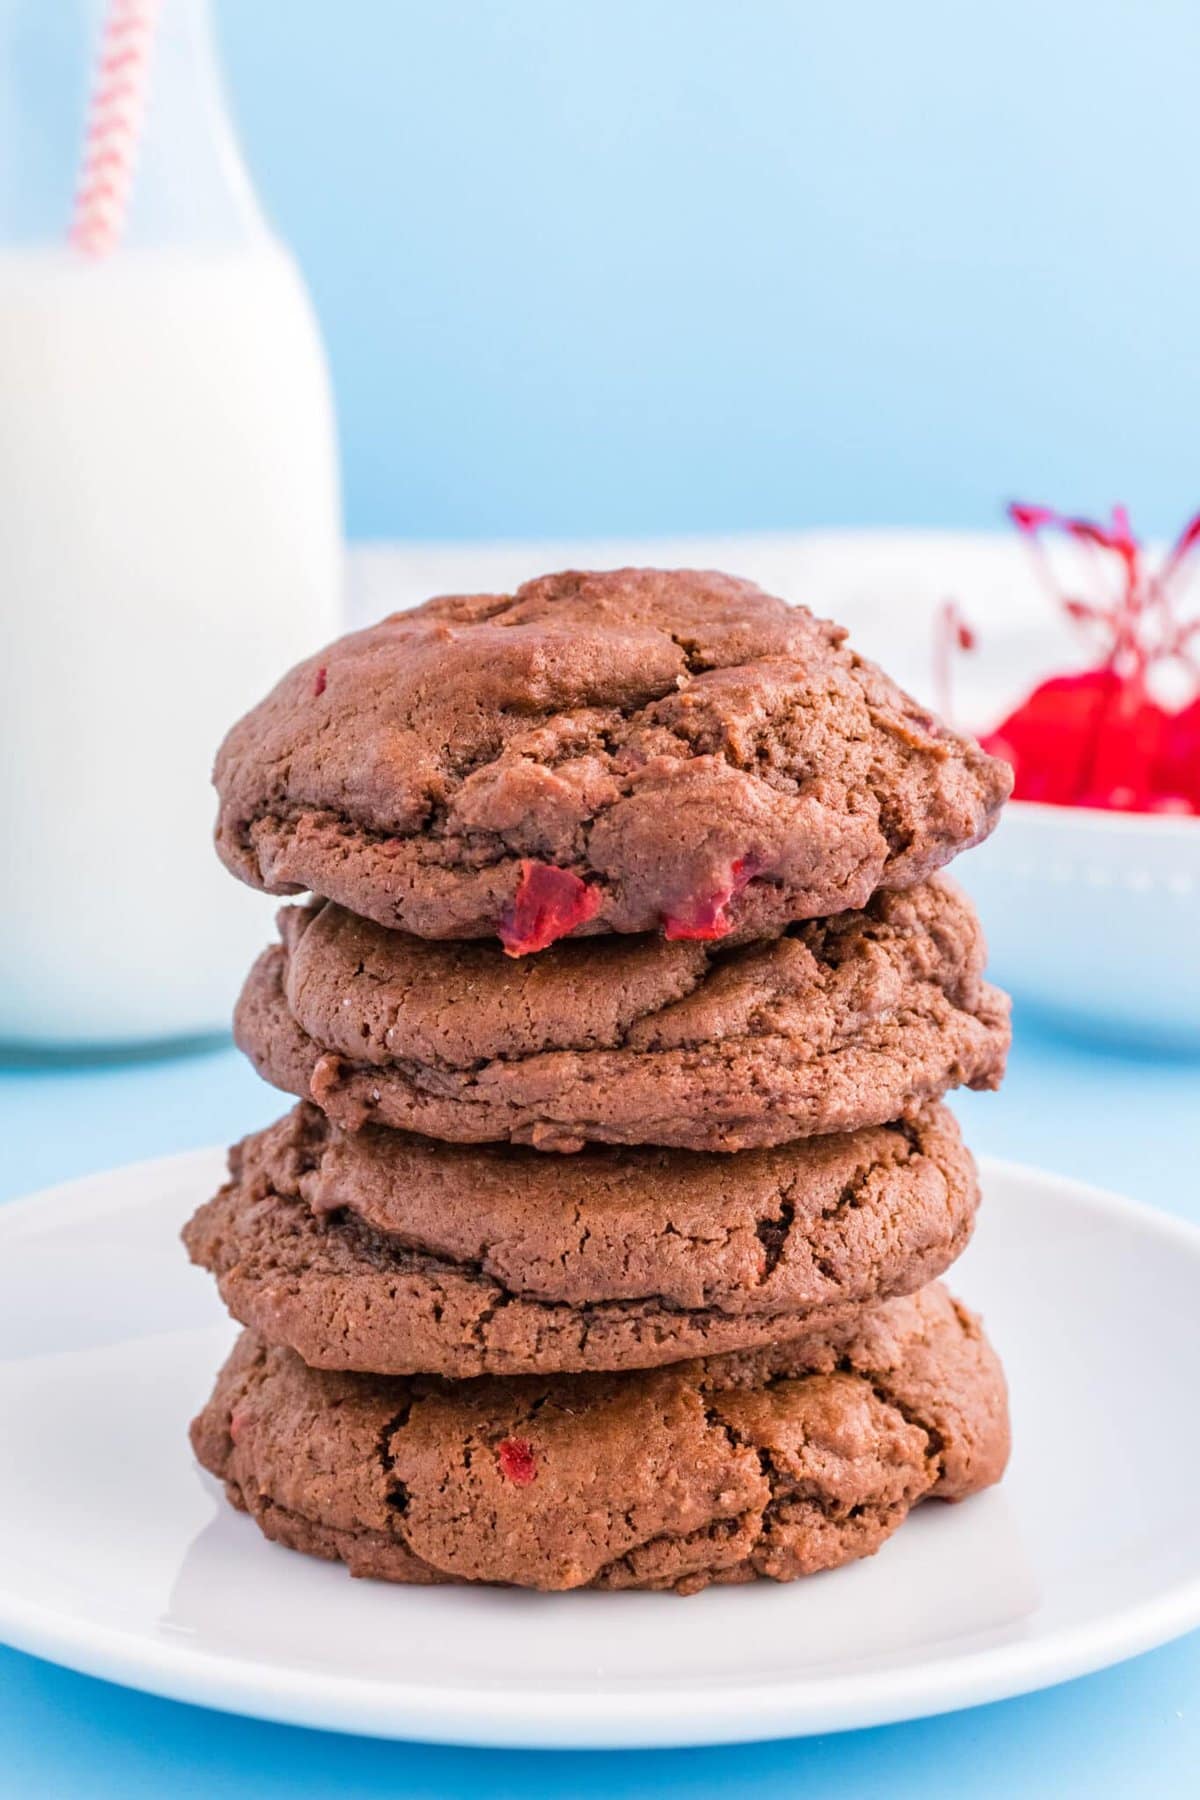 The Chocolate Cherry Cookies stacked on each other.